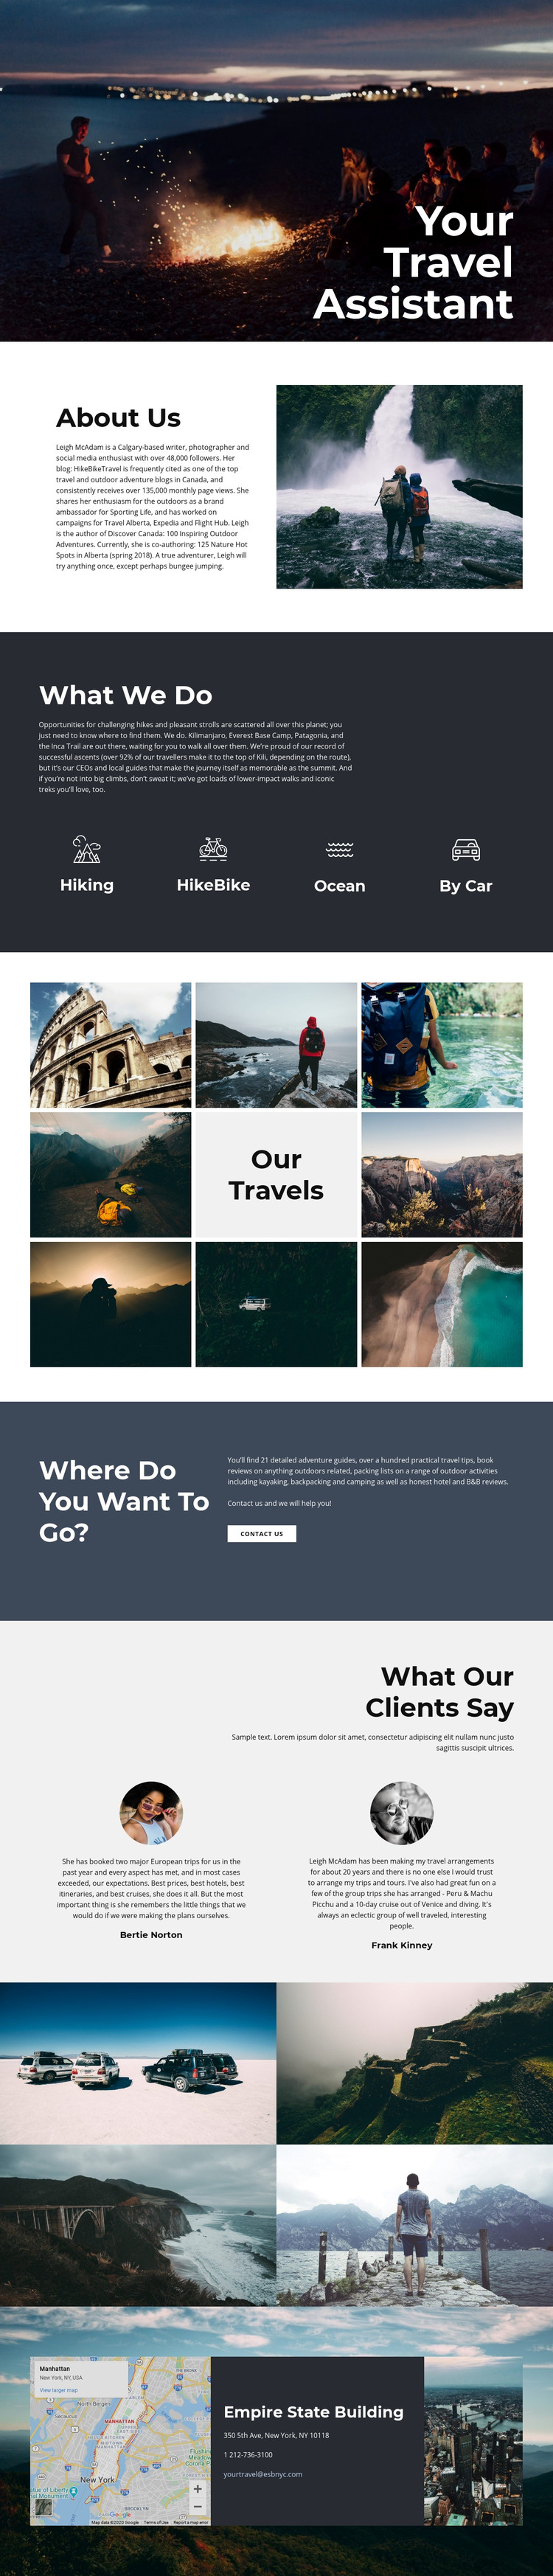 Travel Assistant Homepage Design